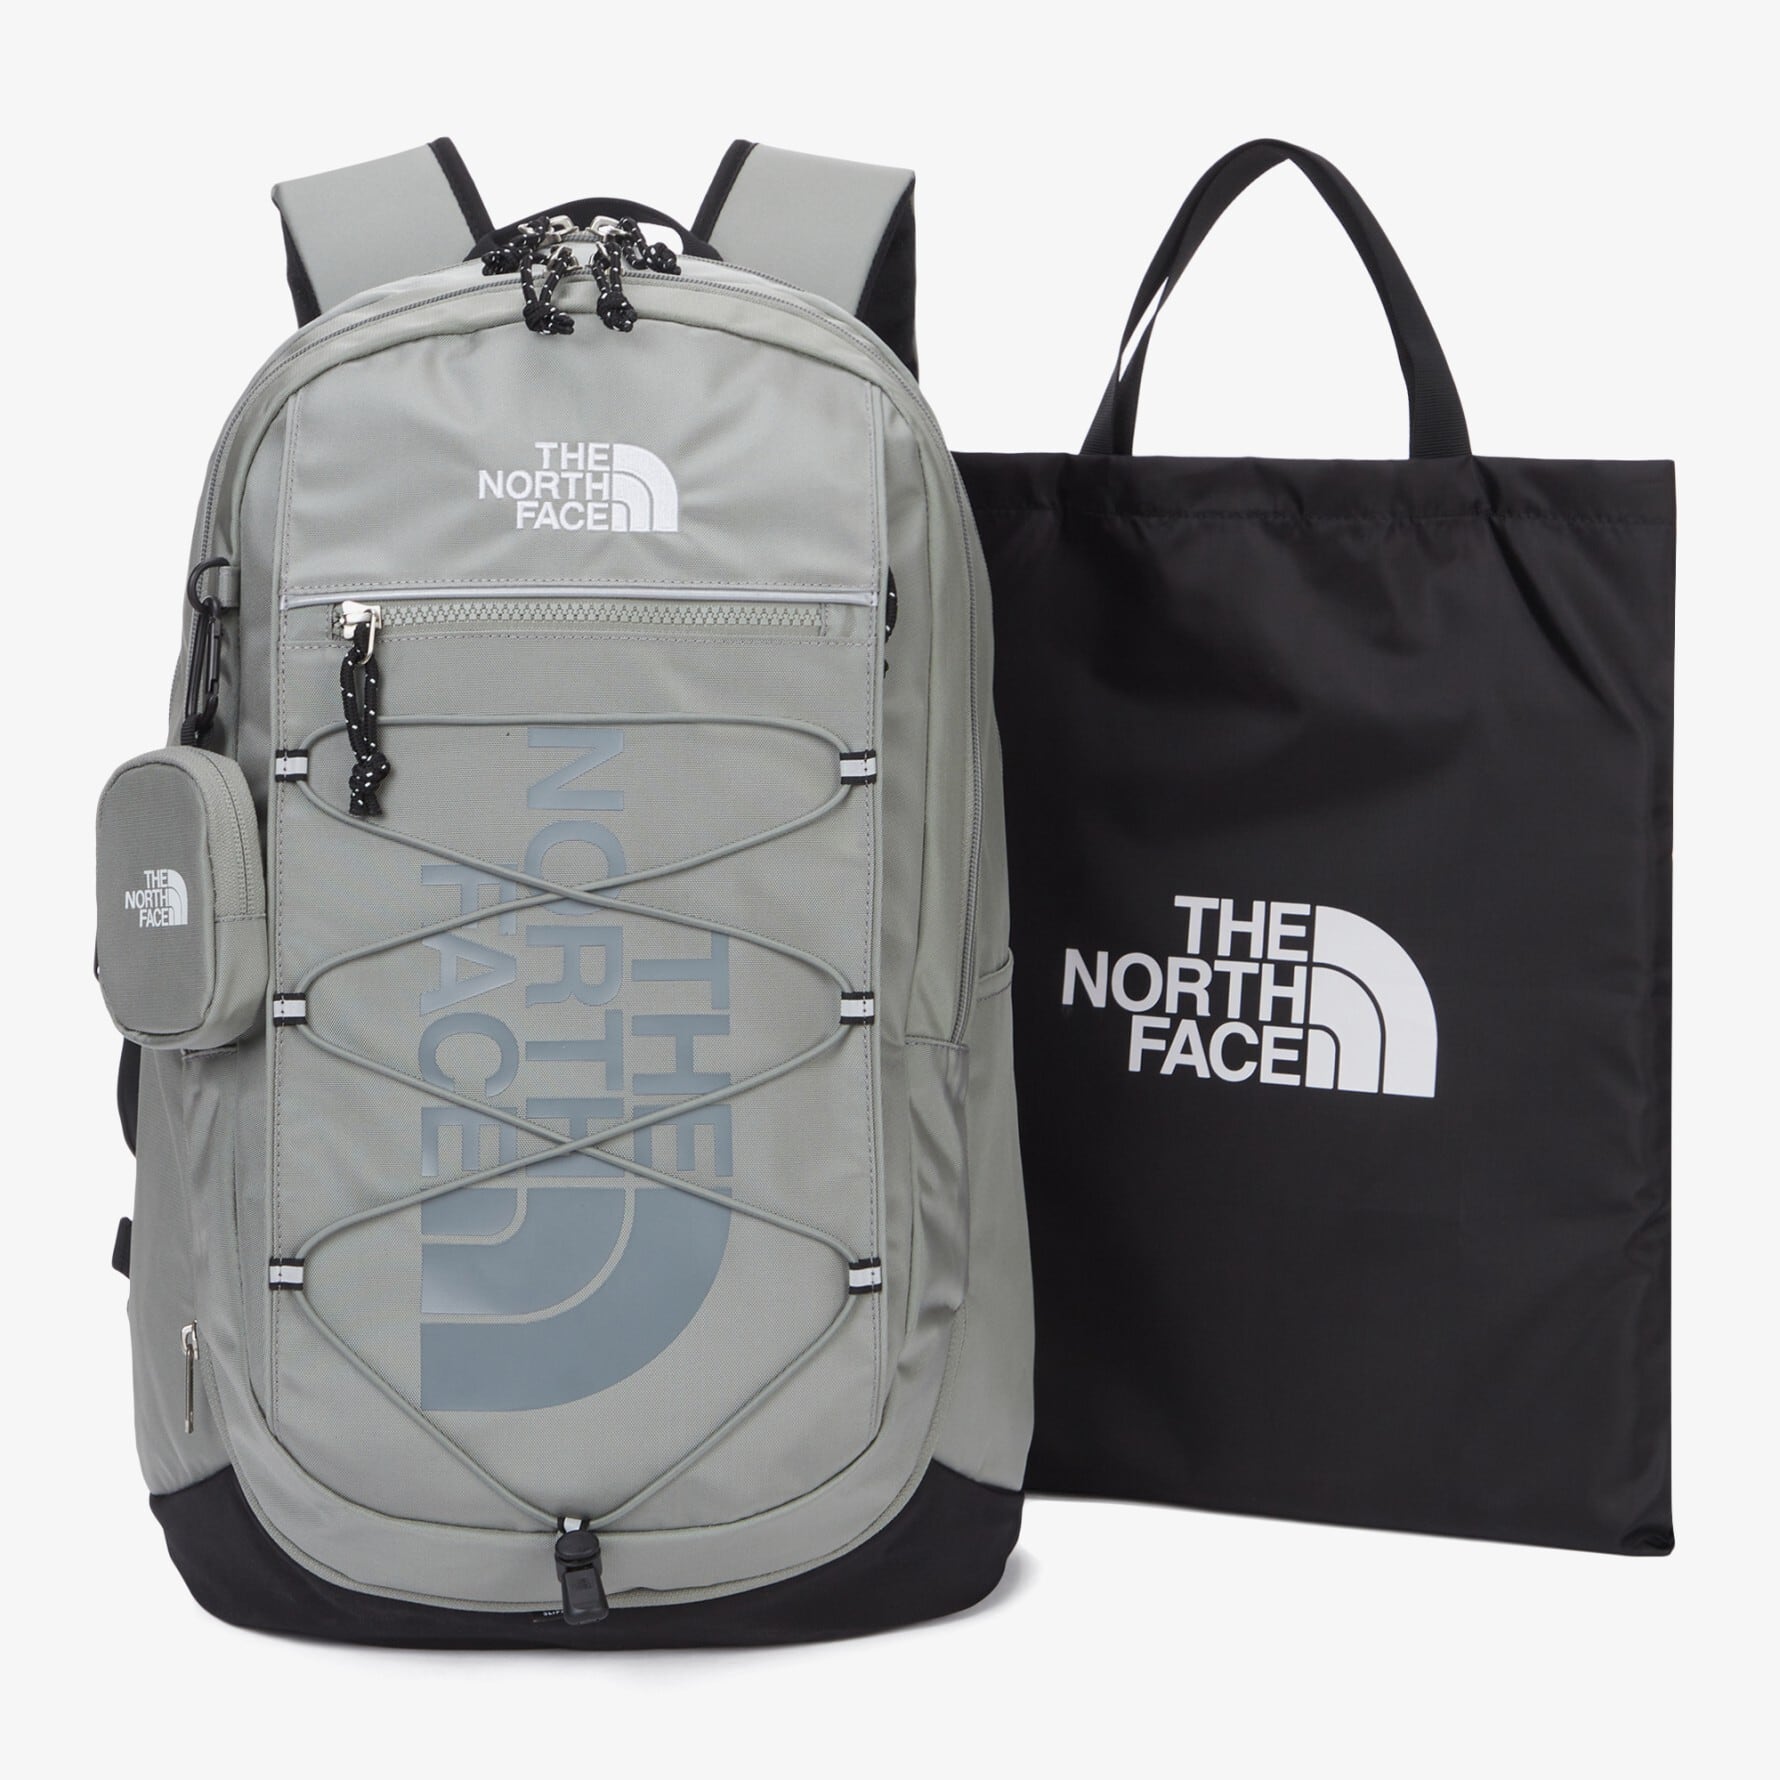 THE NORTH FACE SUPER PACK おまけ付き バックパック